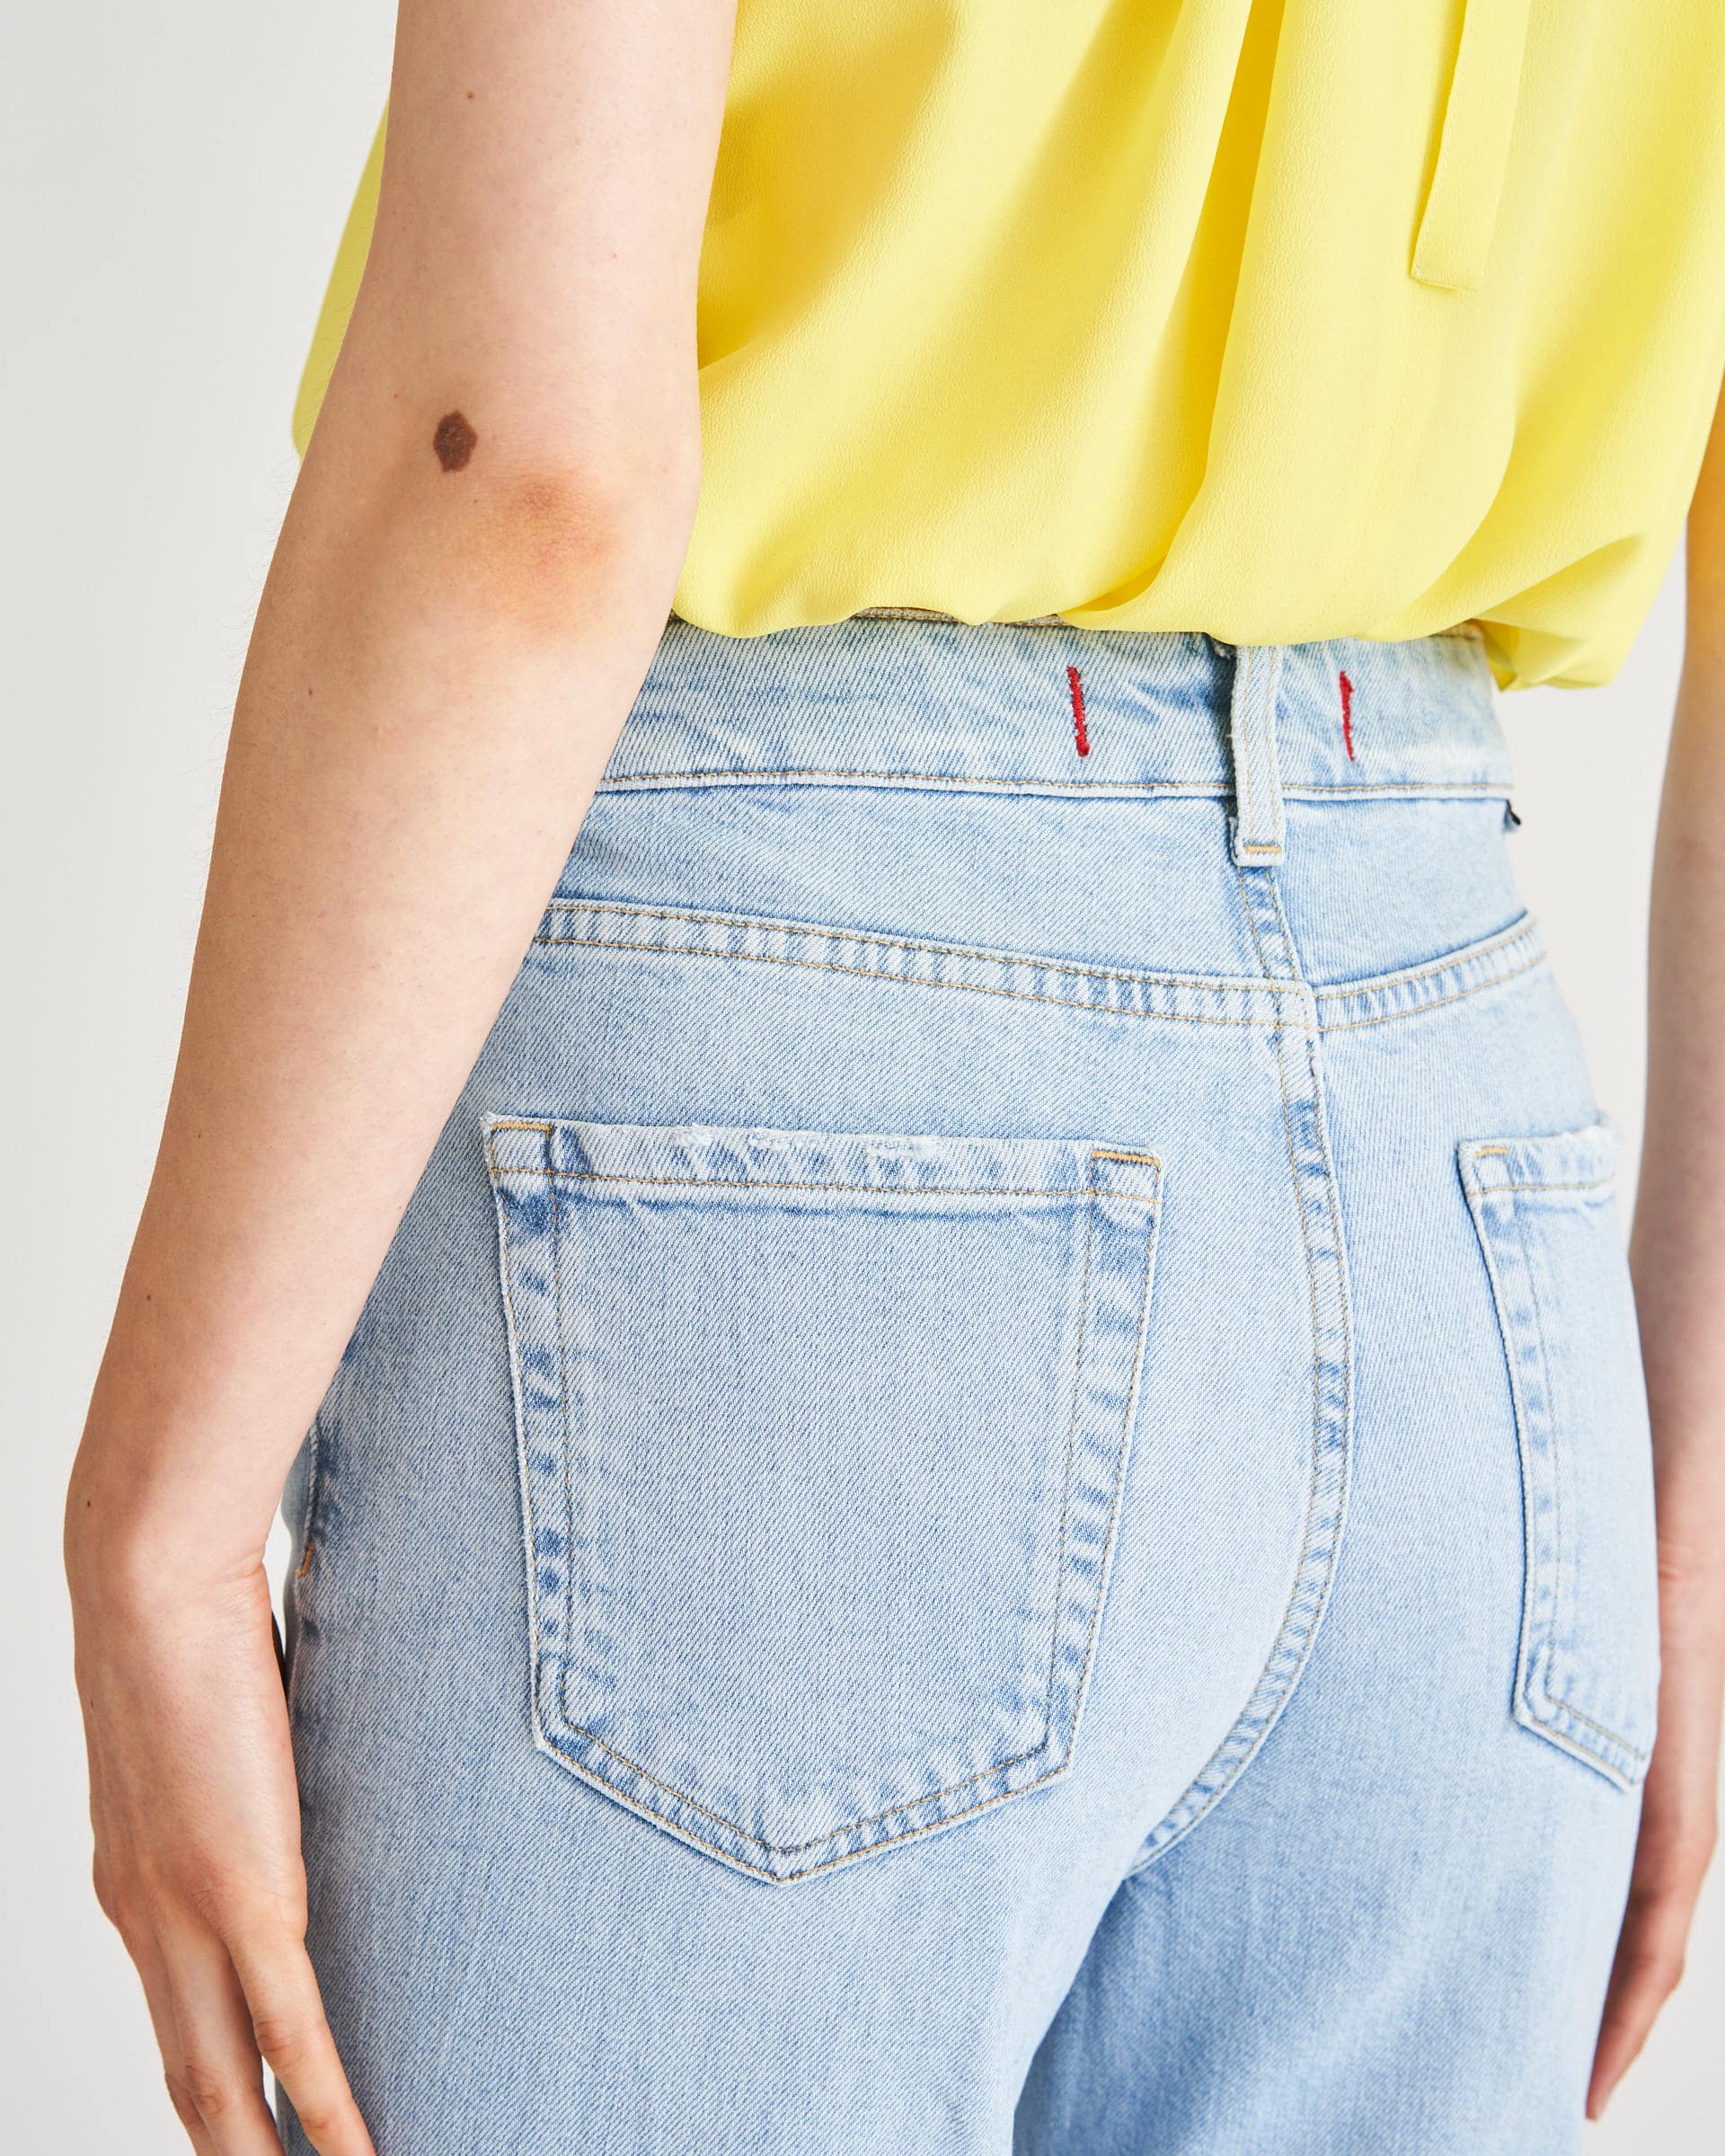 The Market Store | Flare Pants In Light Wash Denim